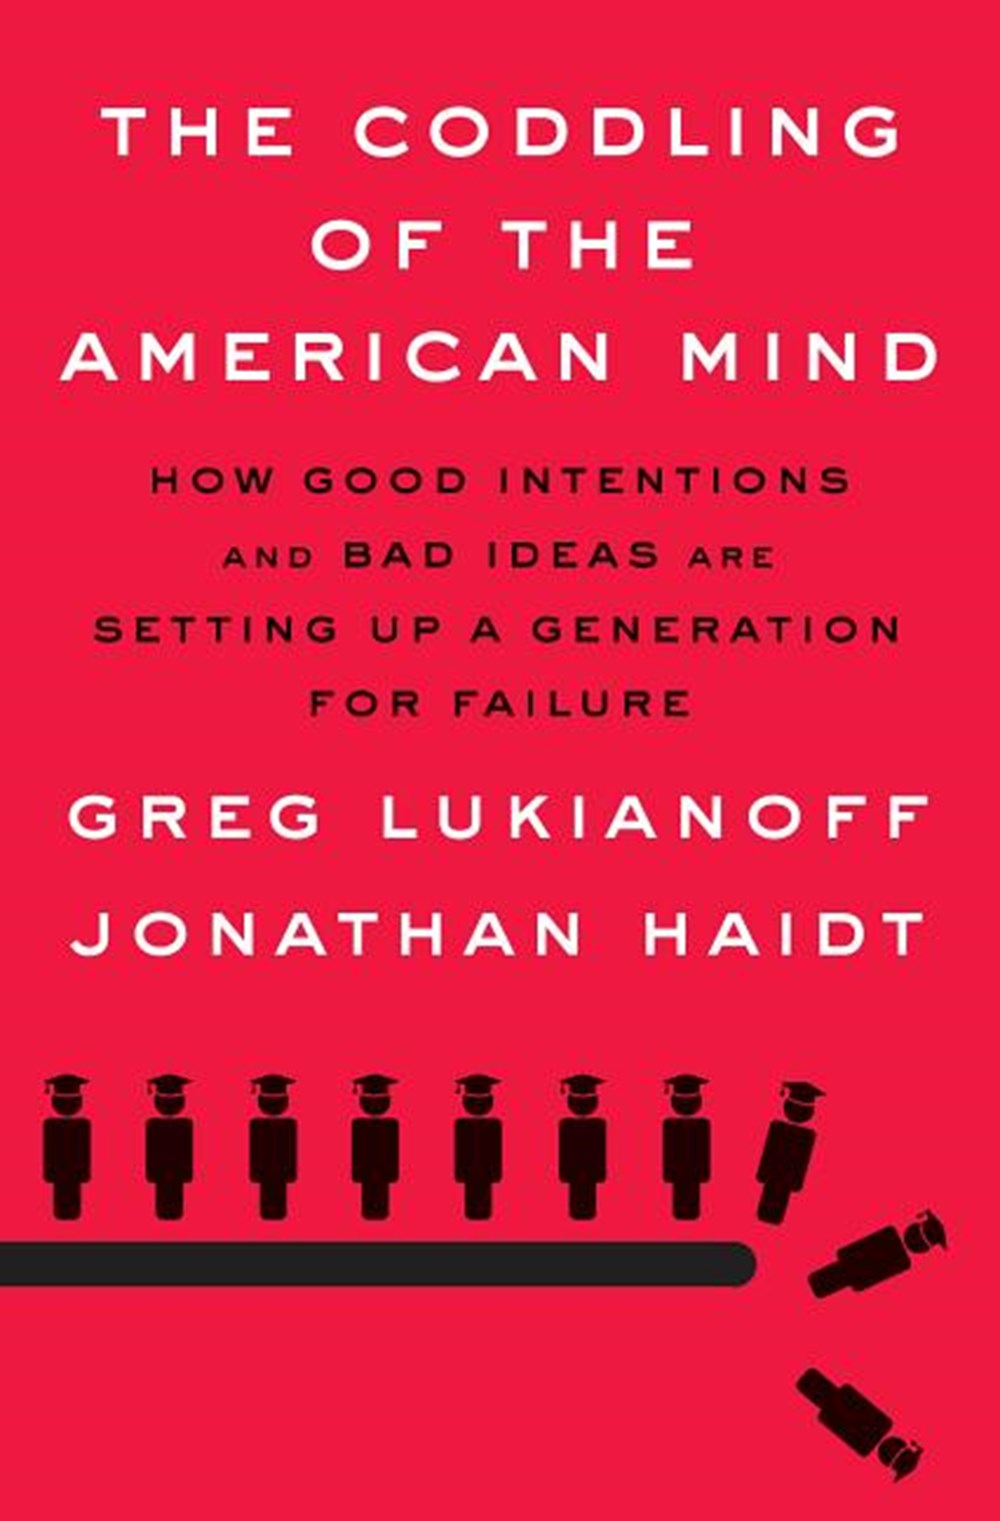 Coddling of the American Mind: How Good Intentions and Bad Ideas Are Setting Up a Generation for Fai